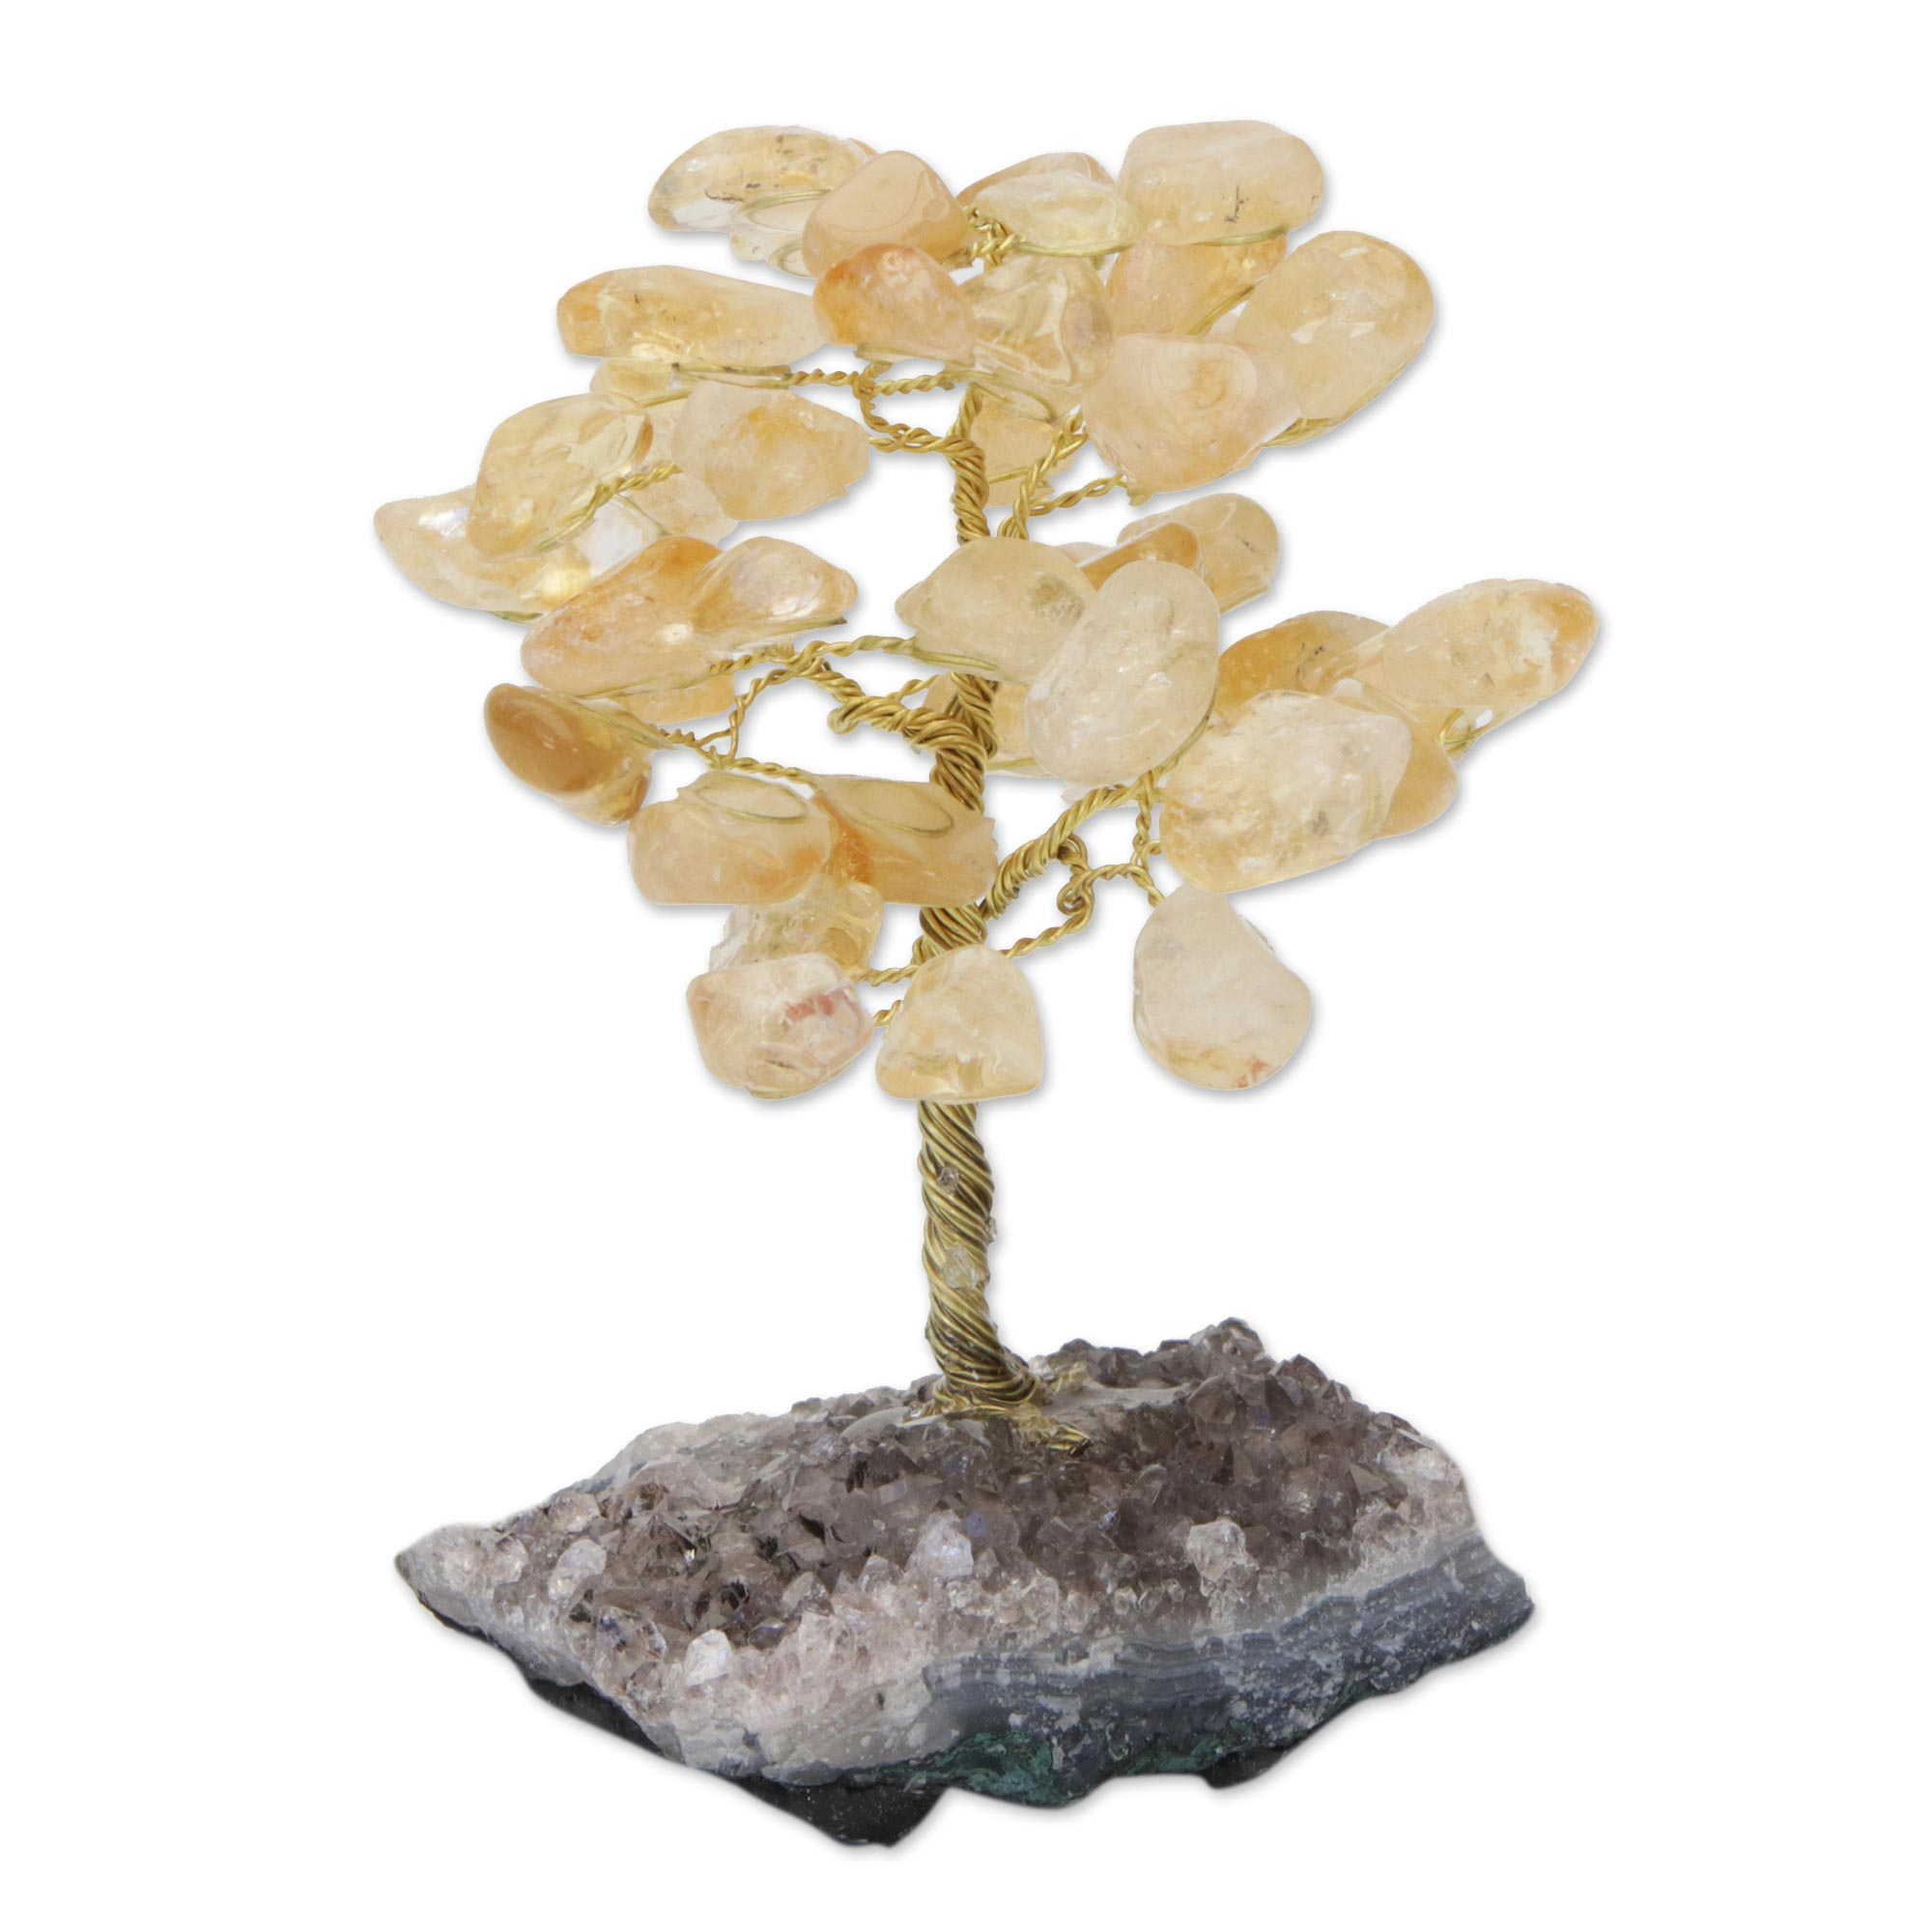 Citrine Gemstone Tree with an Amethyst Base from Brazil - Sunny Leaves ...